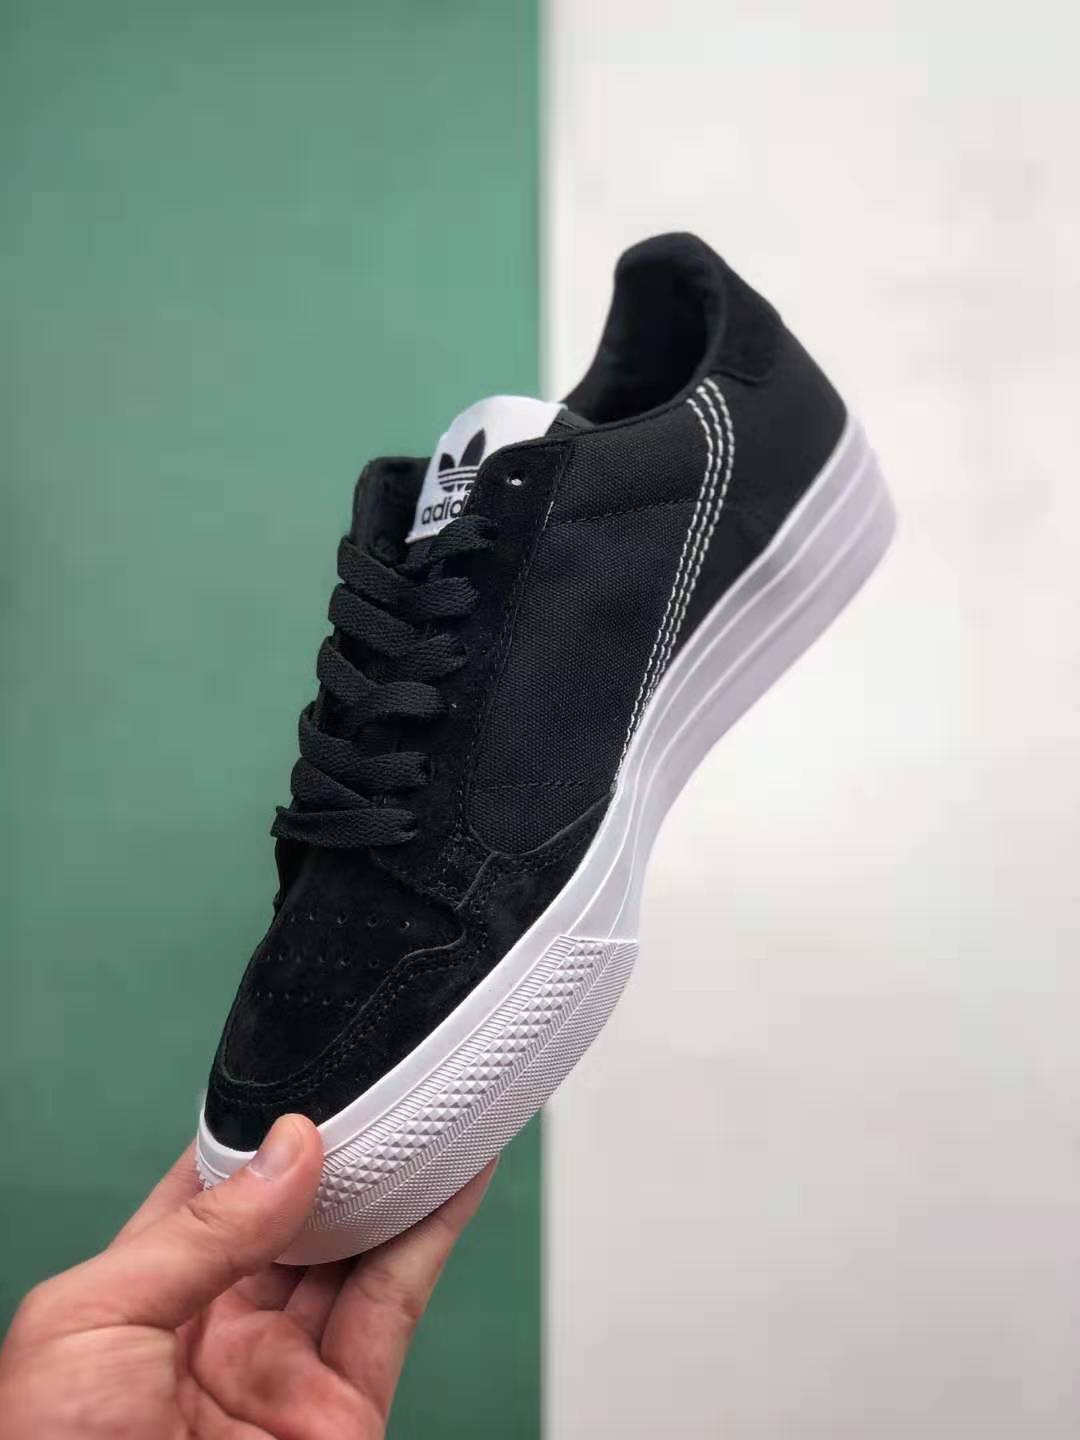 Adidas Continental Vulc Core Black EF3524 - Classic Style and Durability